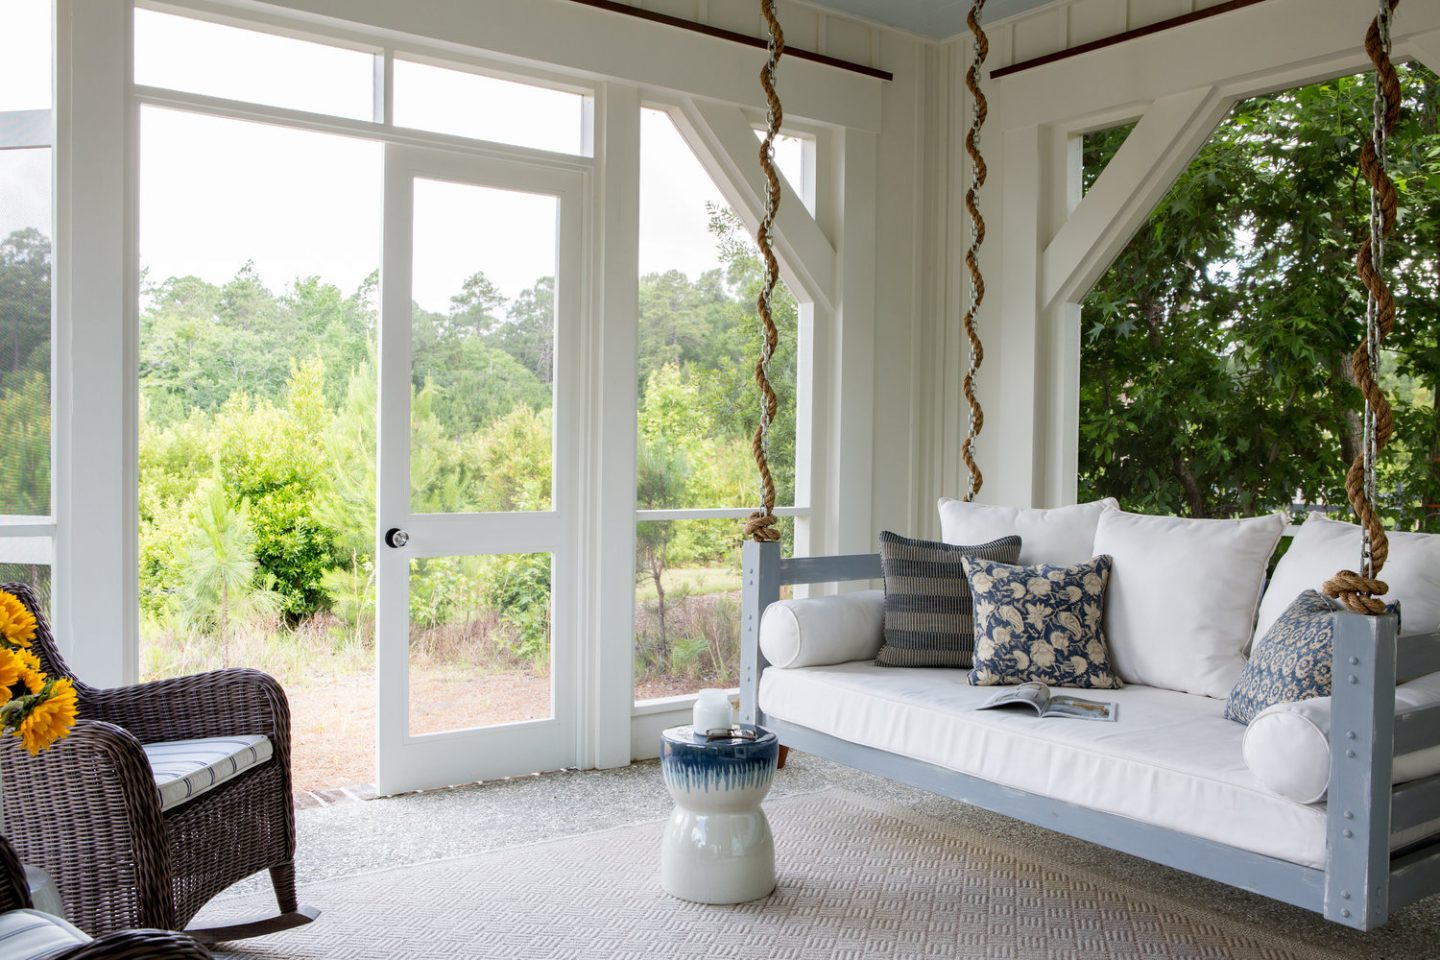 Southern style hanging bed porch swing on a bedroom porch in a coastal cottage by Lisa Furey. #porchswing #hangingbed #southcarolinacottage #porchdecor #interiordecor #coastalstyle #charlestonstyle